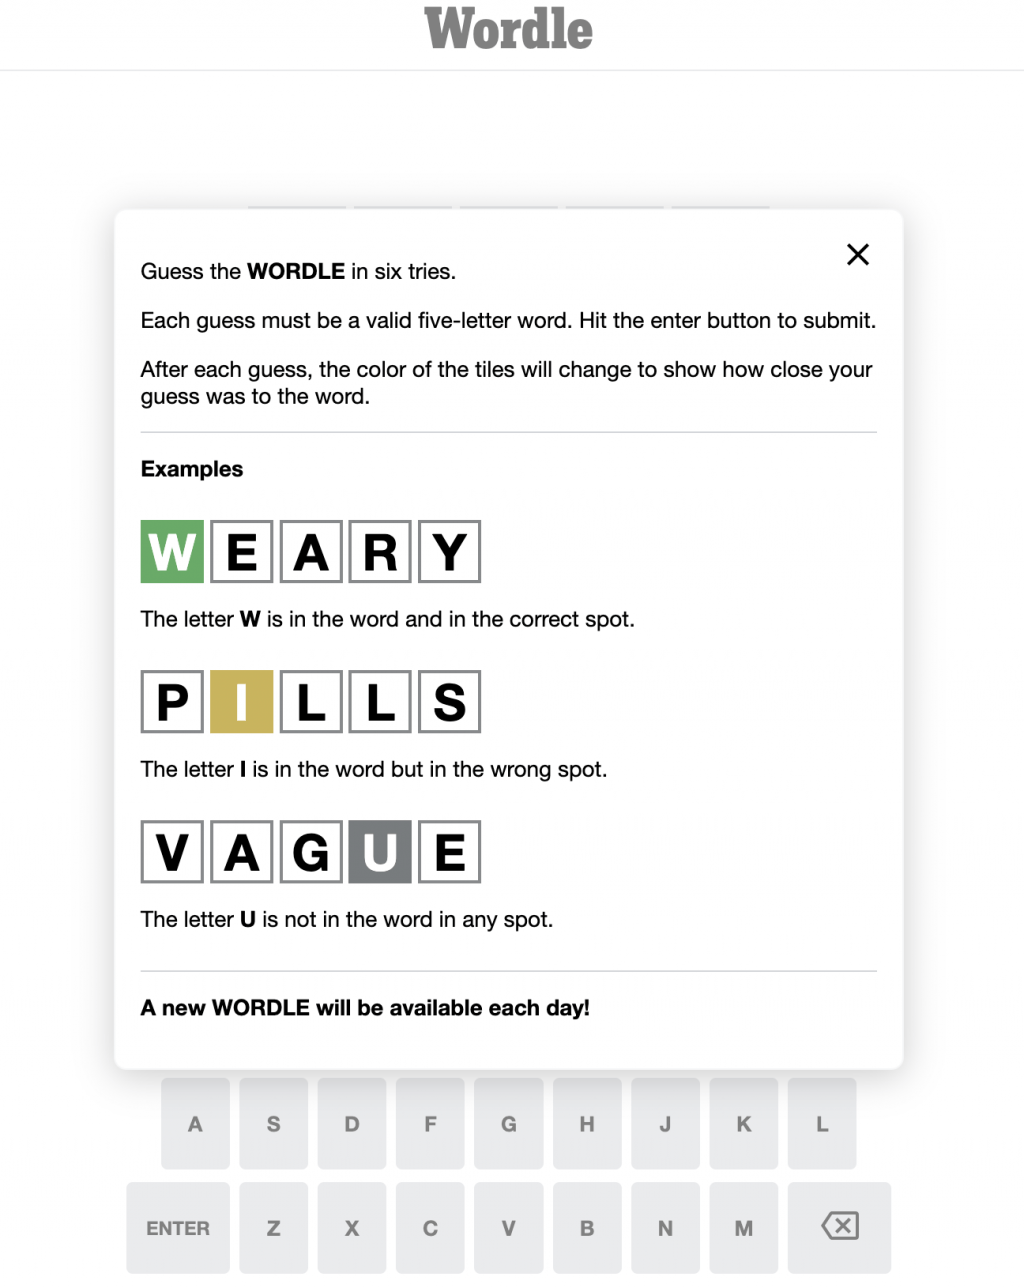 The browser-specific "Wordle" game offers a new word for users to guess each day. When "Wordle" became popular in winter 2021, Steven Cravotta&squot;s different "Wordle!" app gained downloads because people thought it was connected to Josh Wardle&squot;s game.